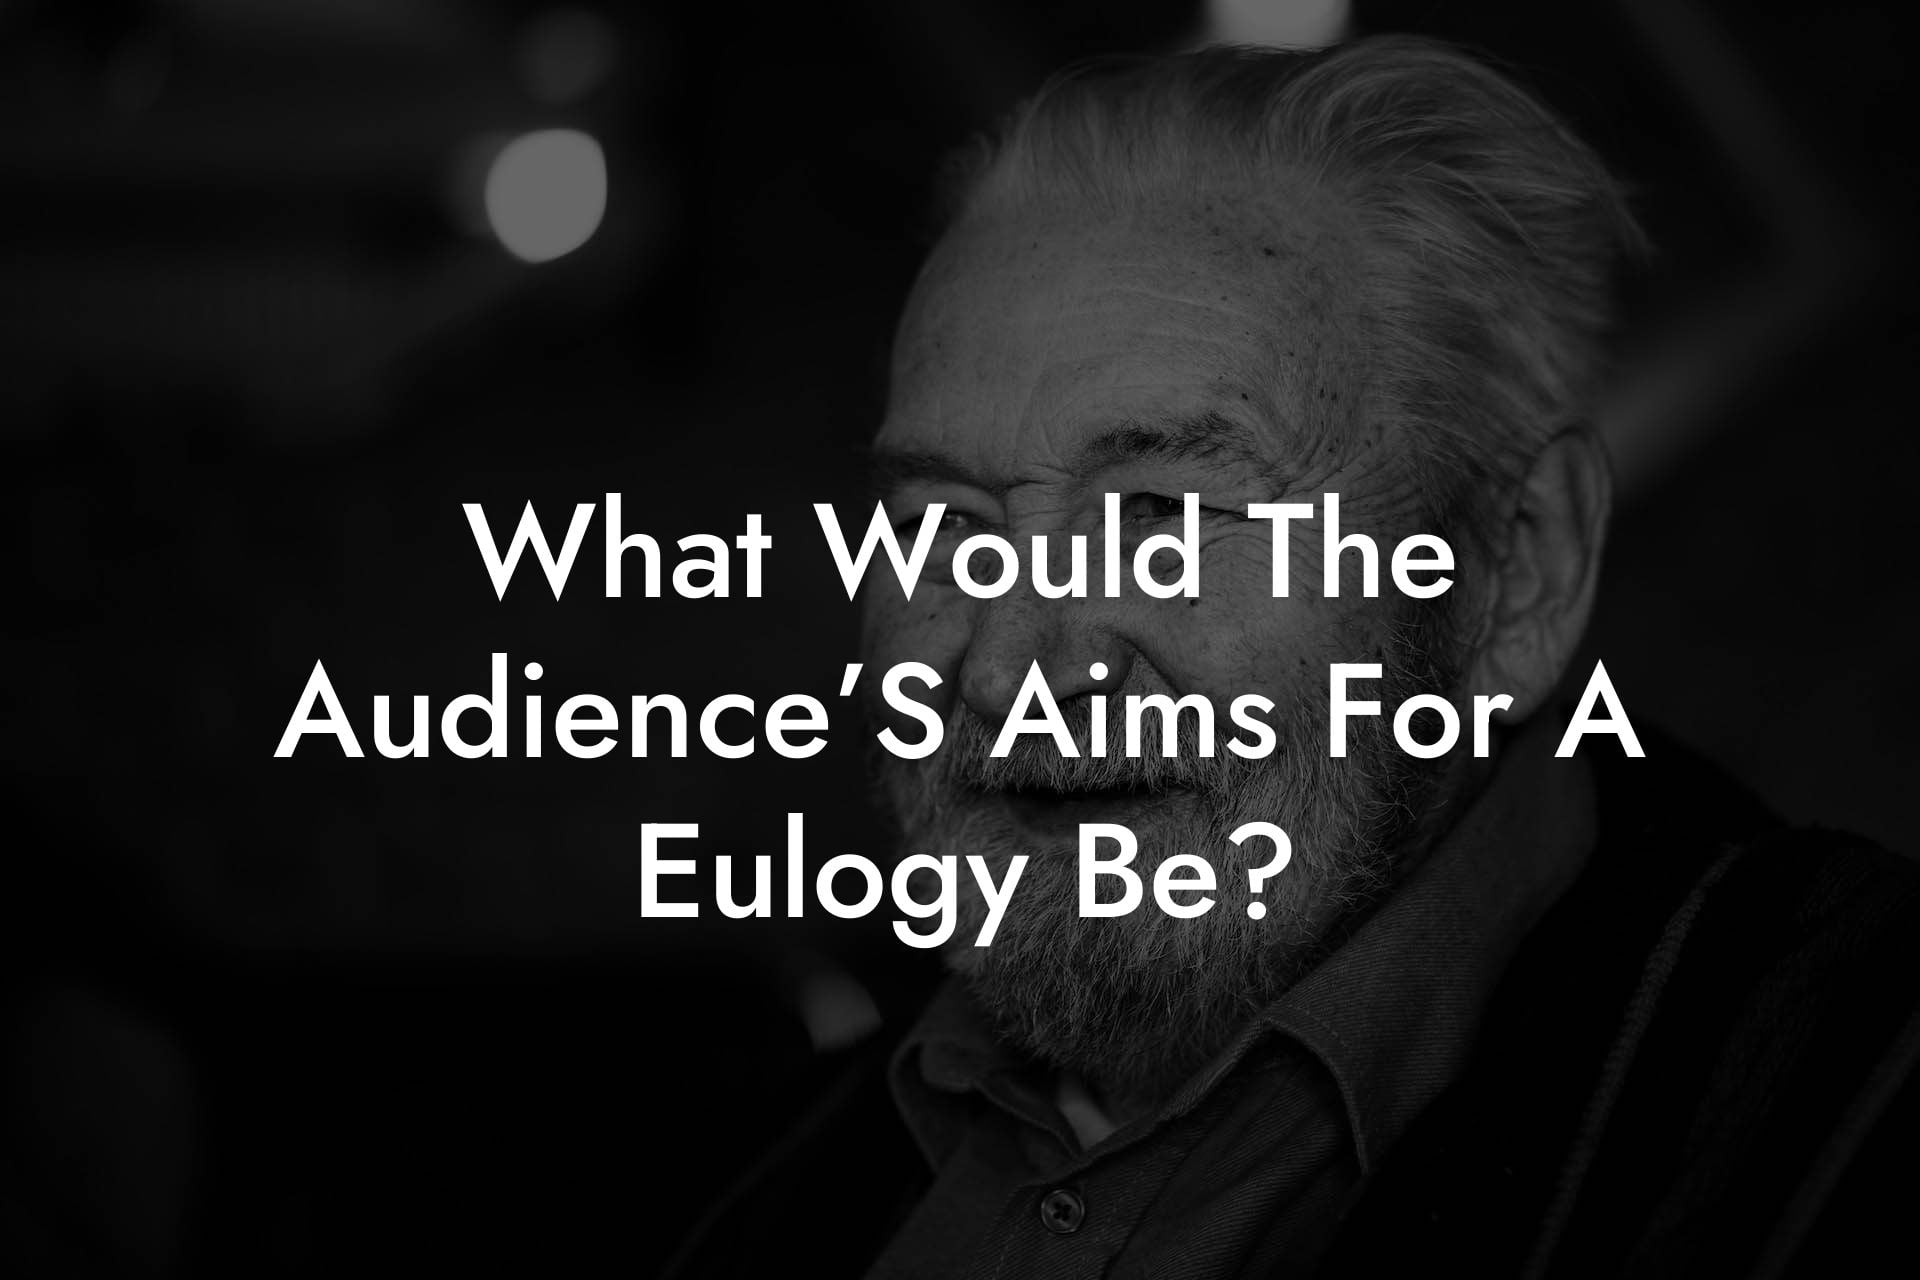 What Would The Audience's Aims For A Eulogy Be